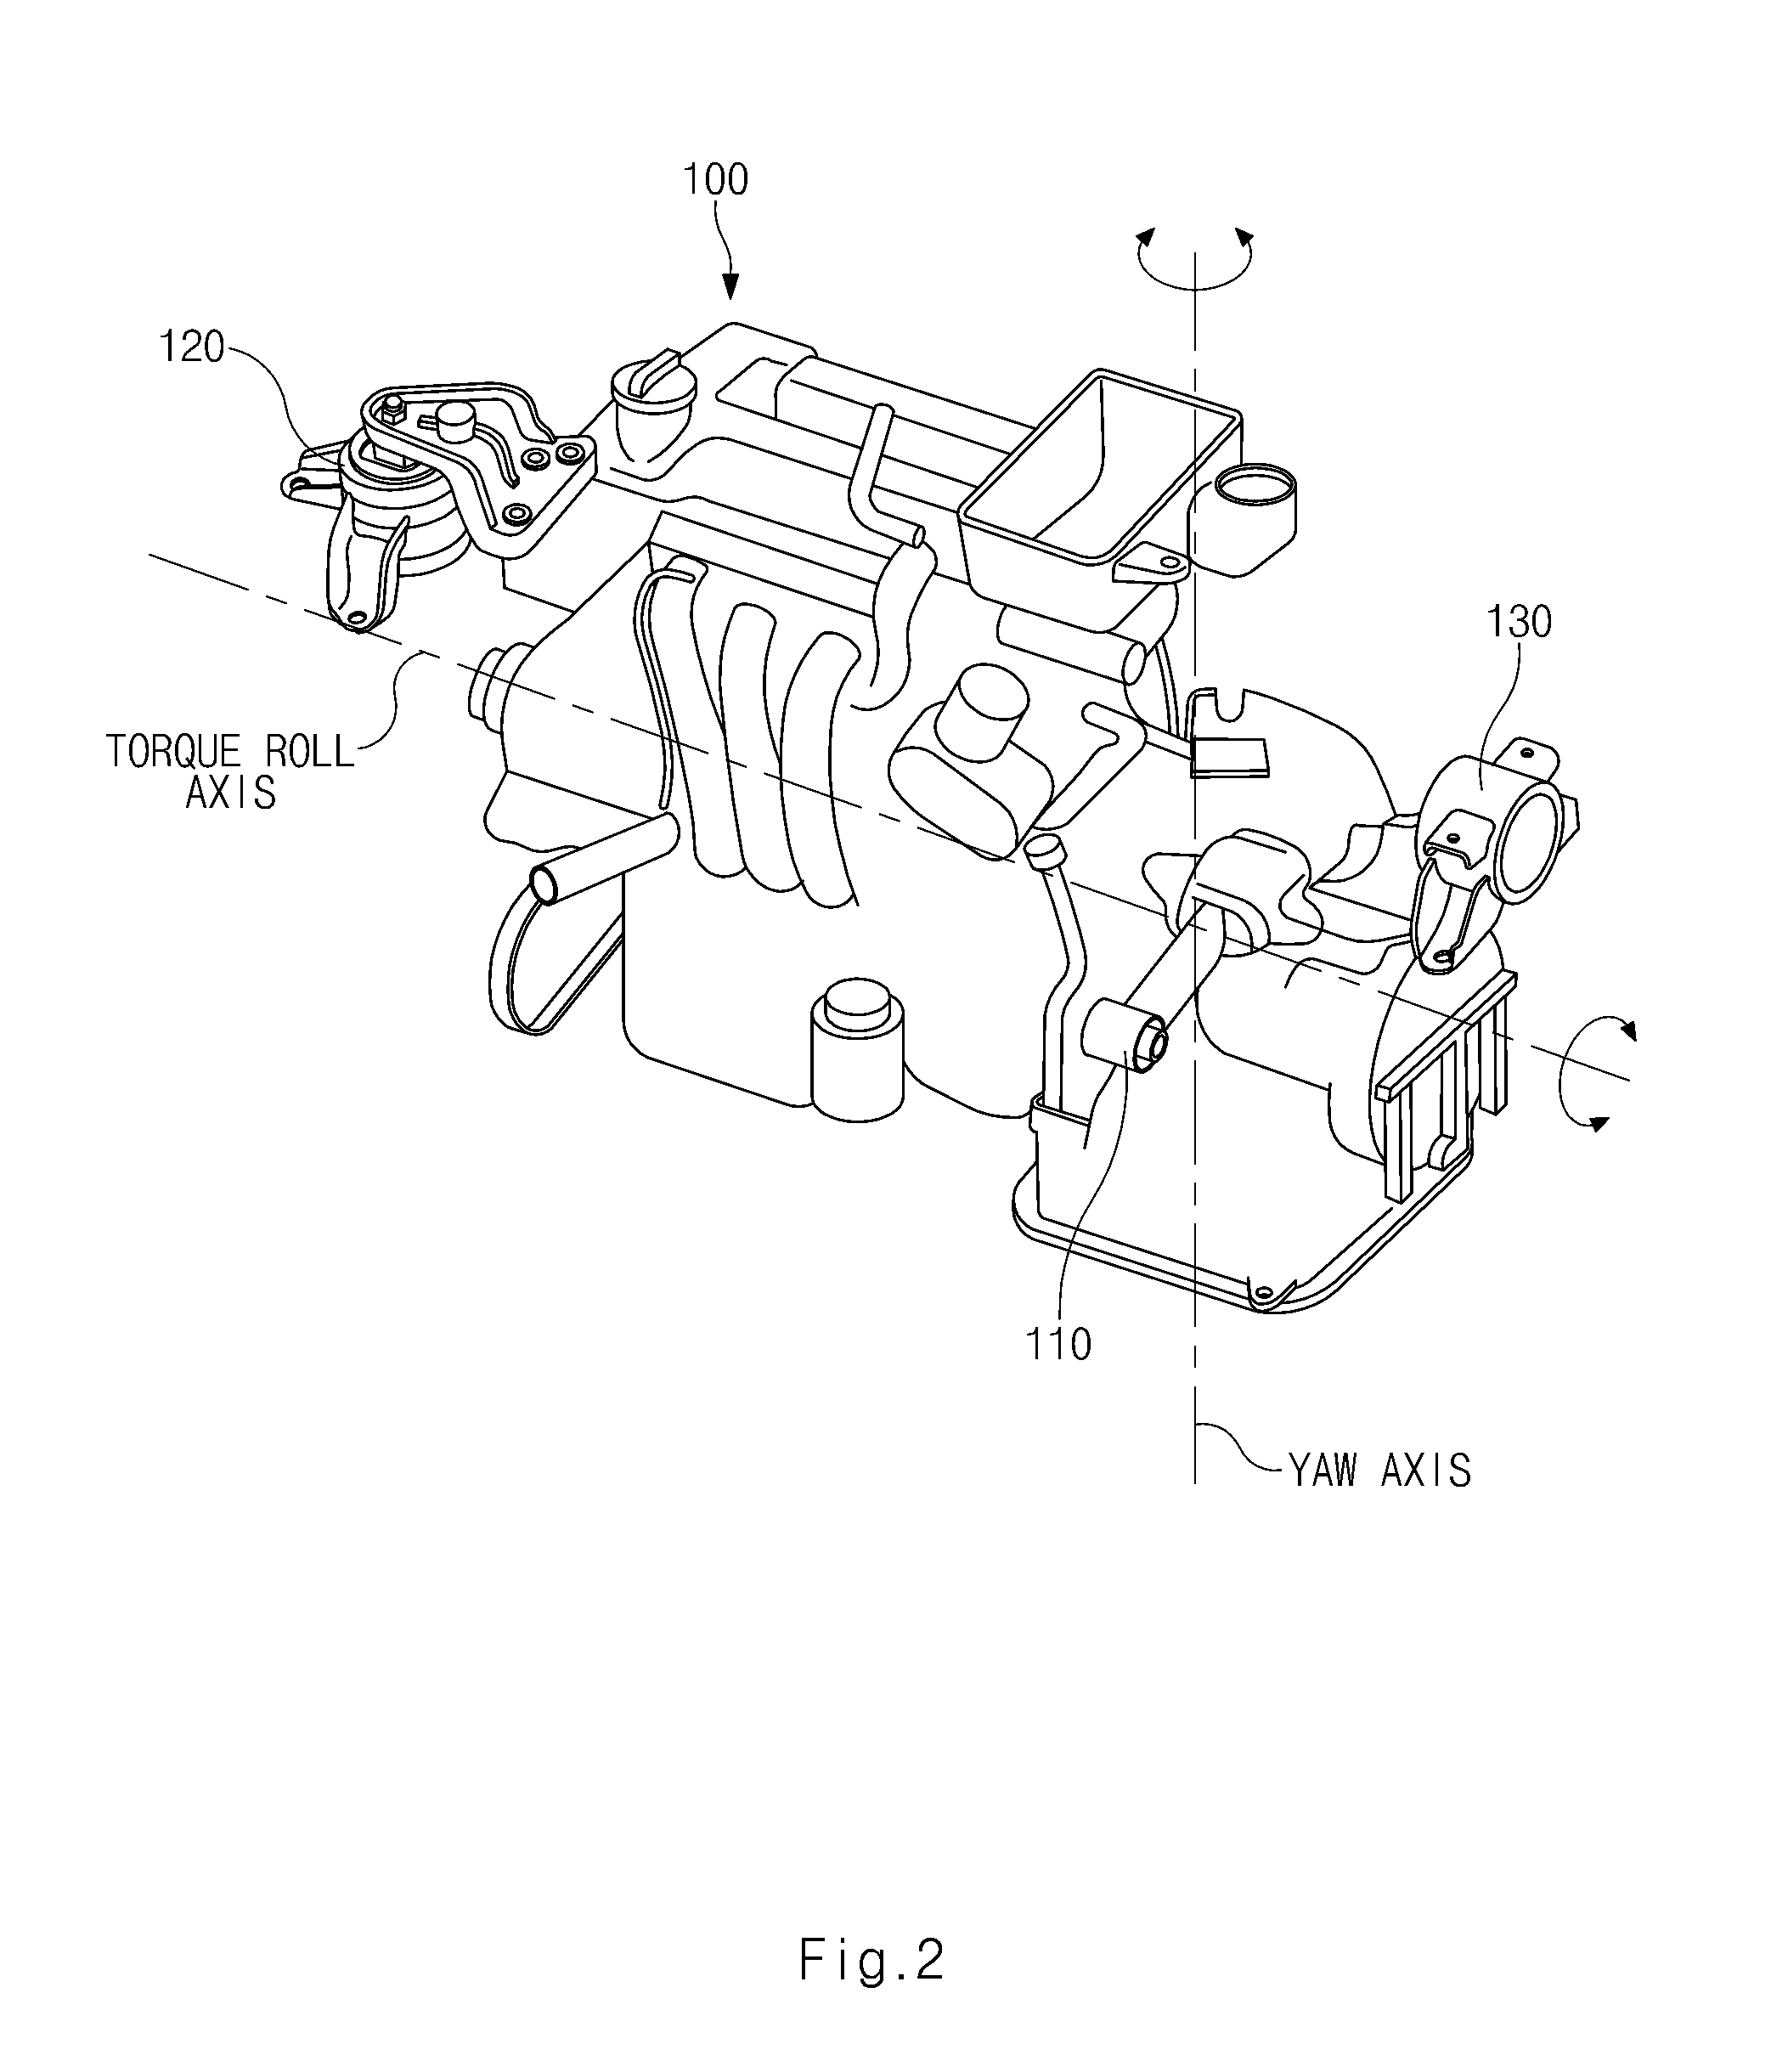 Engine mounting structure for reducing vibration